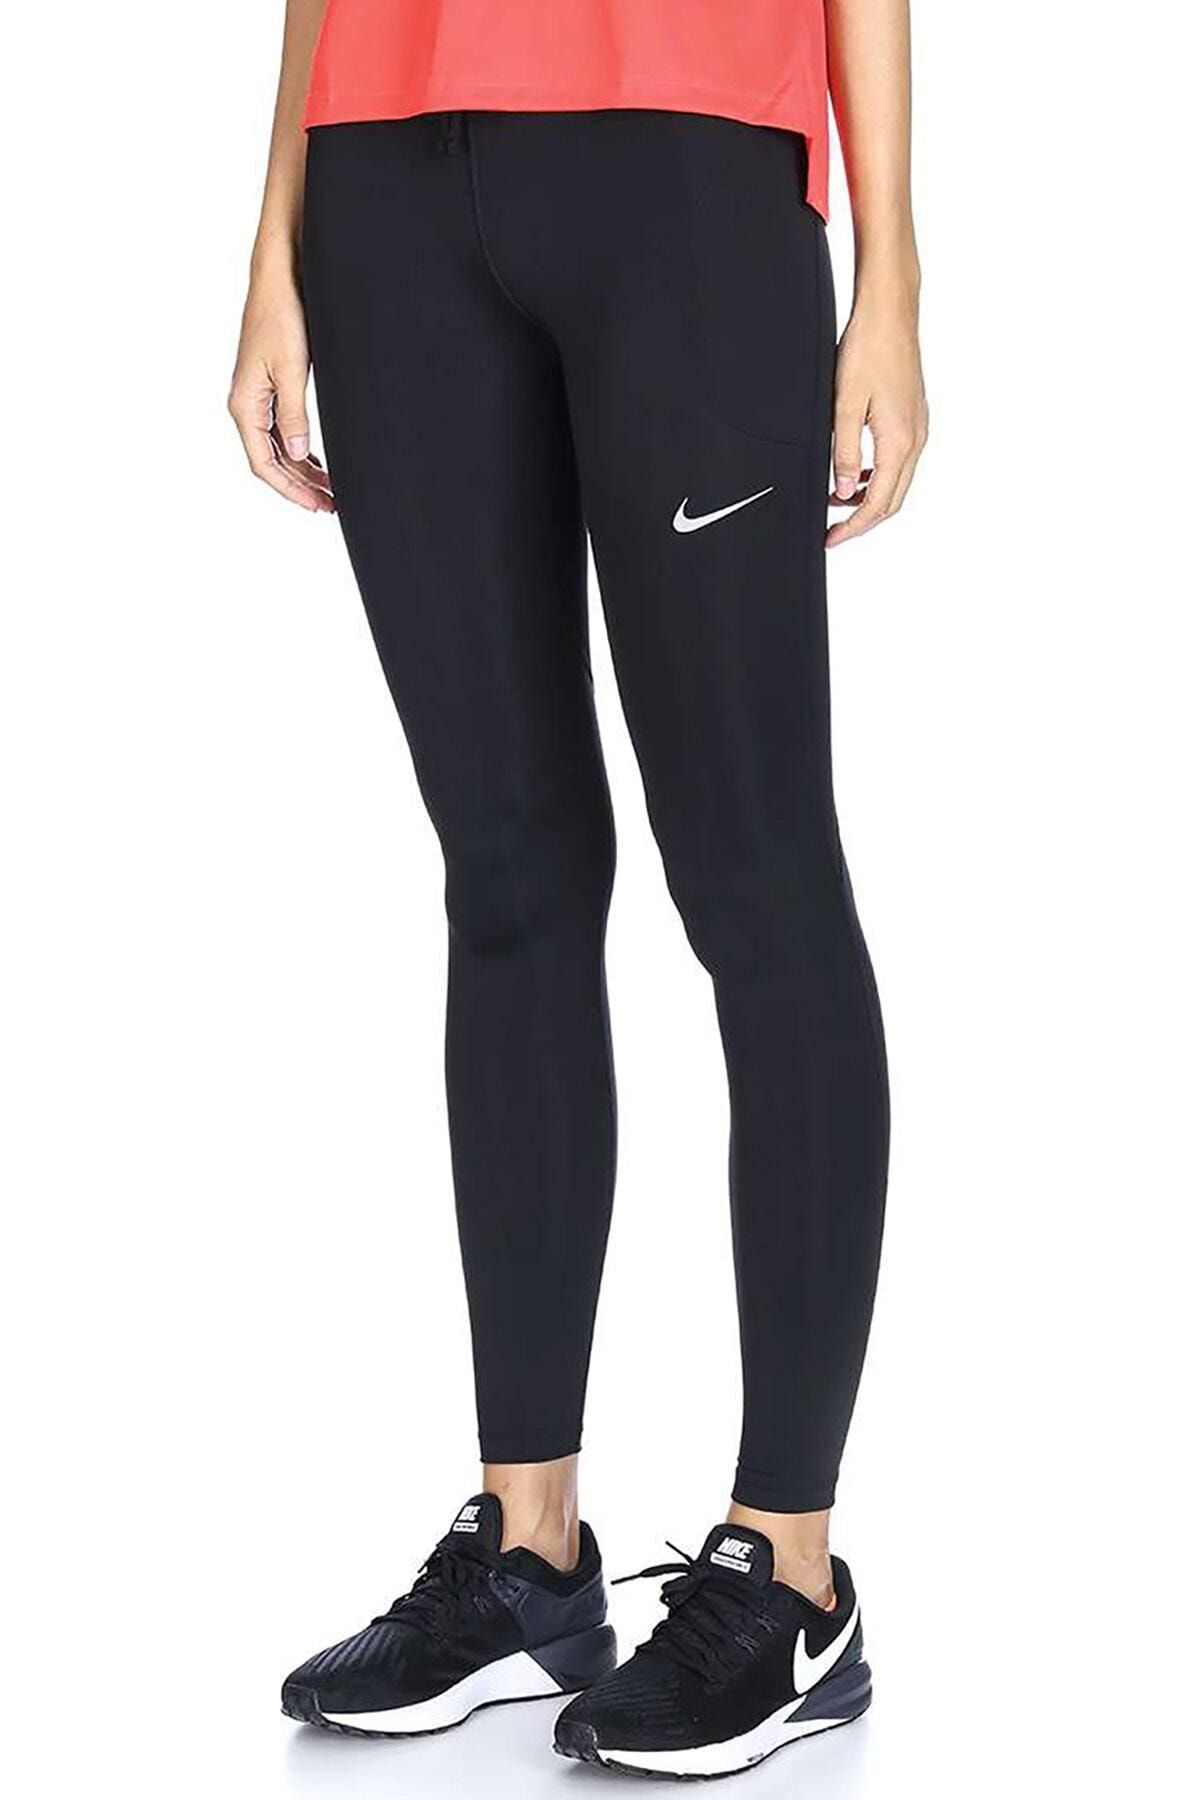  Nike Womens Fast High-Waist Running Leggings Black AT3103-010- Size X-Small : Clothing, Shoes & Jewelry